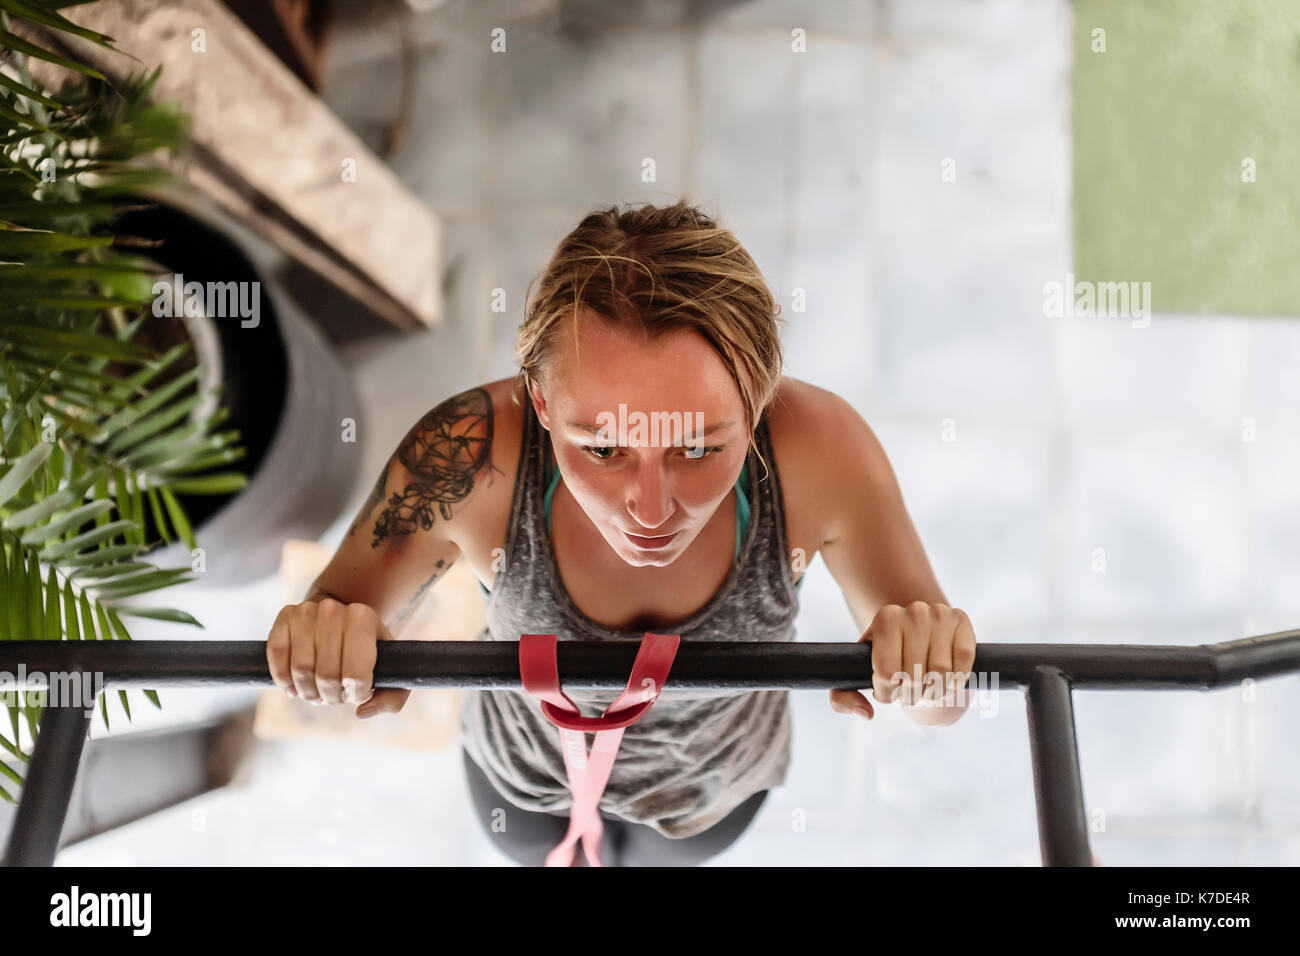 High angle view of woman doing pull-ups at gym Stock Photo